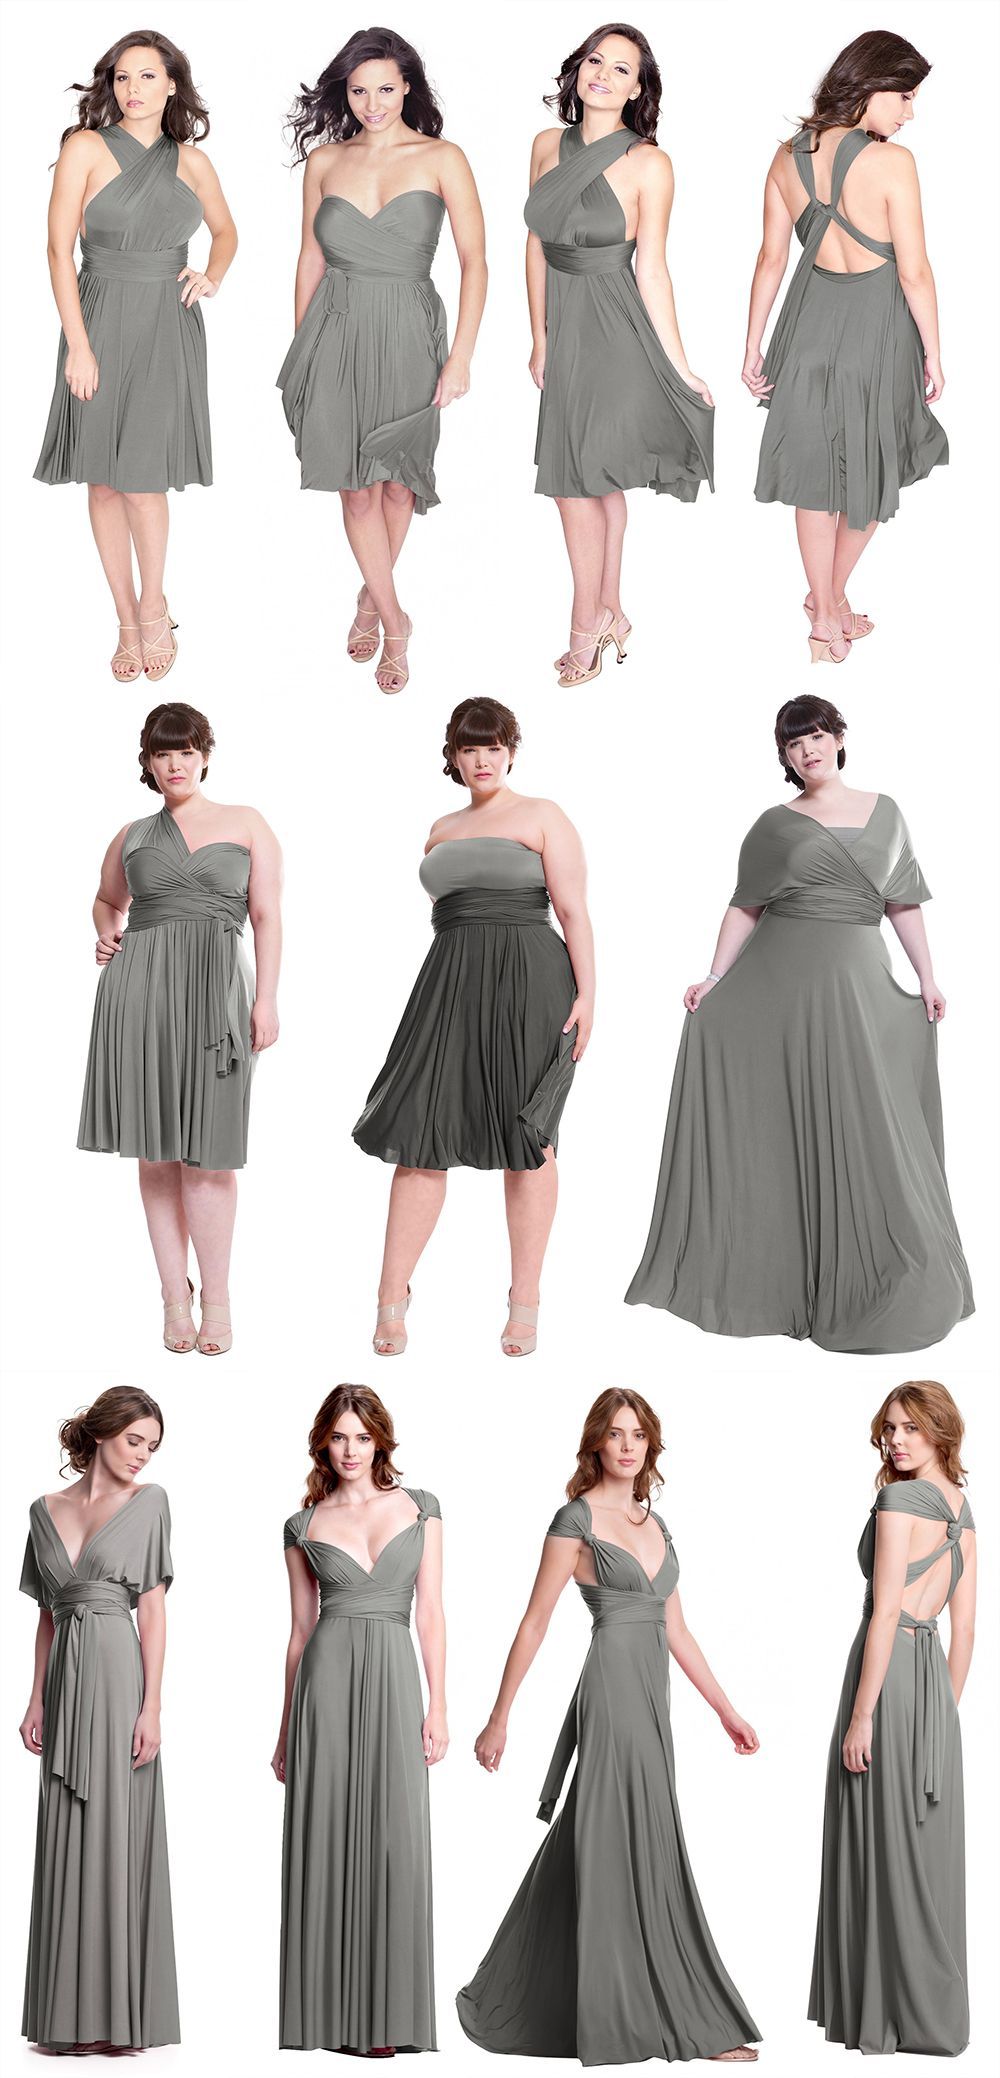 Introducing the Sakura Convertible Dresses in Dove Grey! The perfect medium grey dress. Just pick the color & your bridesmaids can